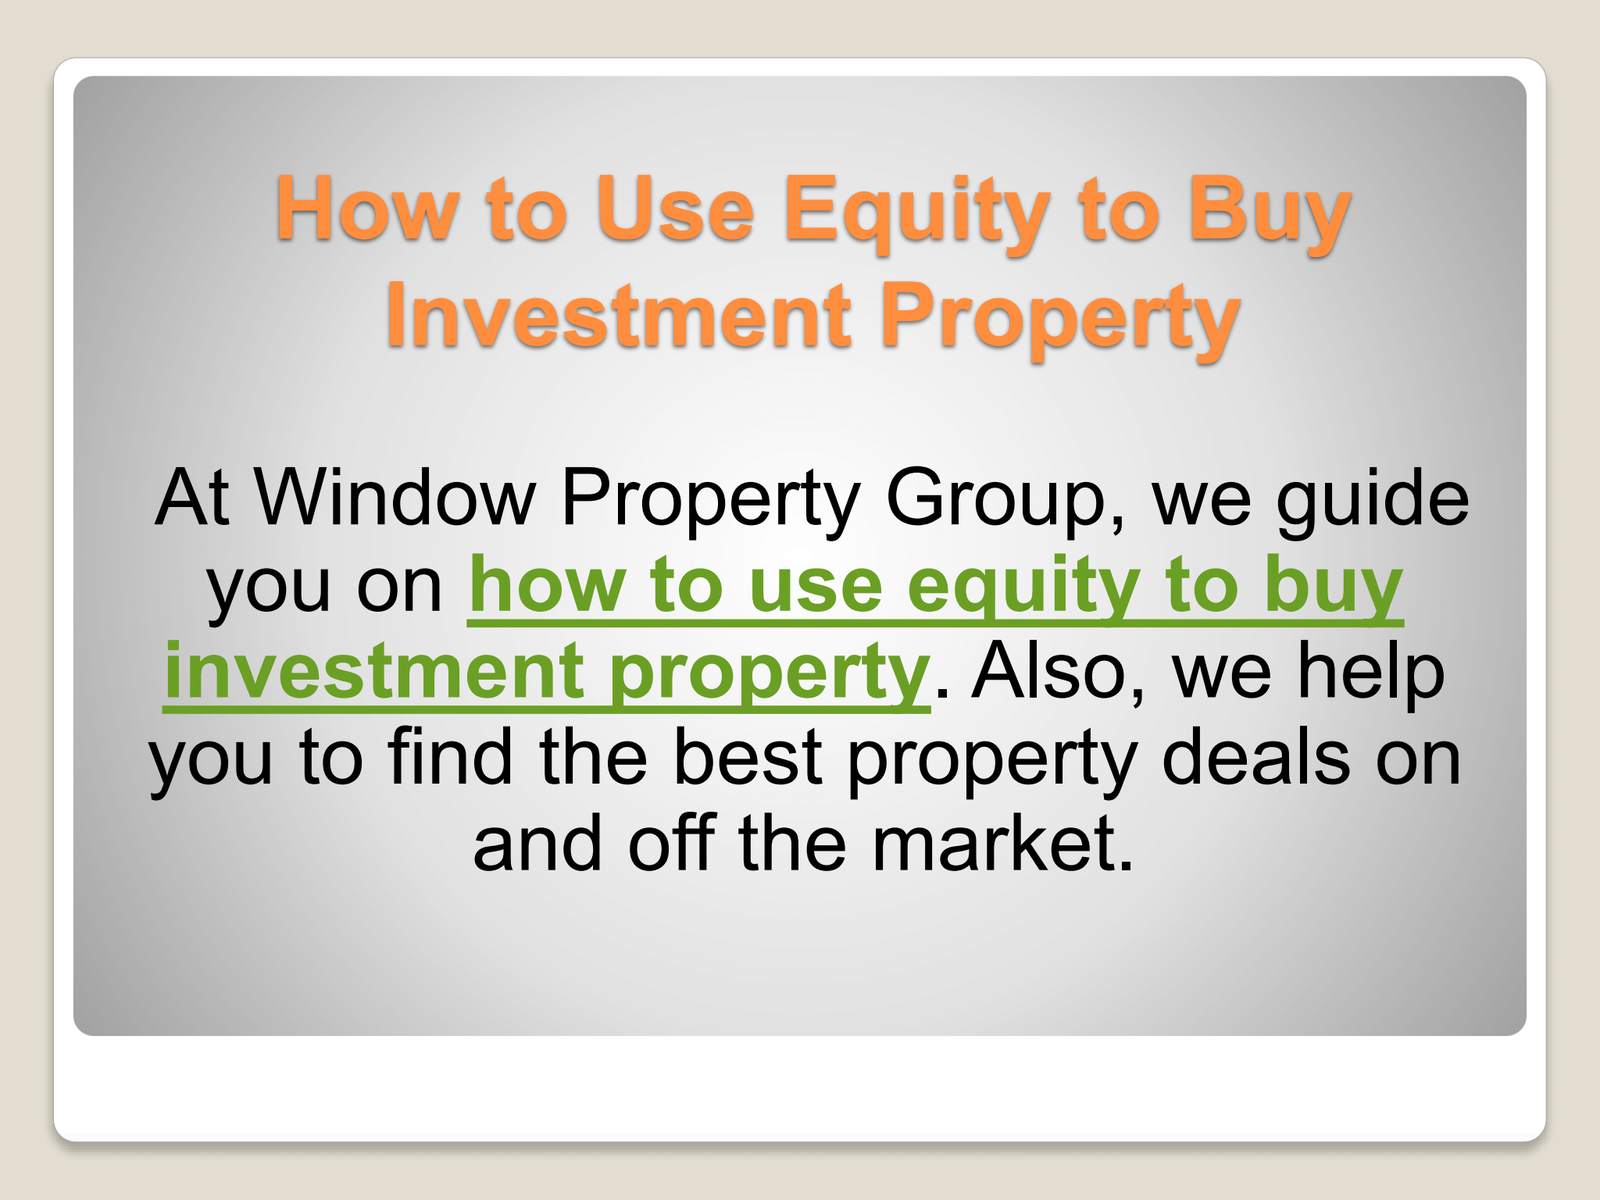 How to Use Equity to Buy Investment Property